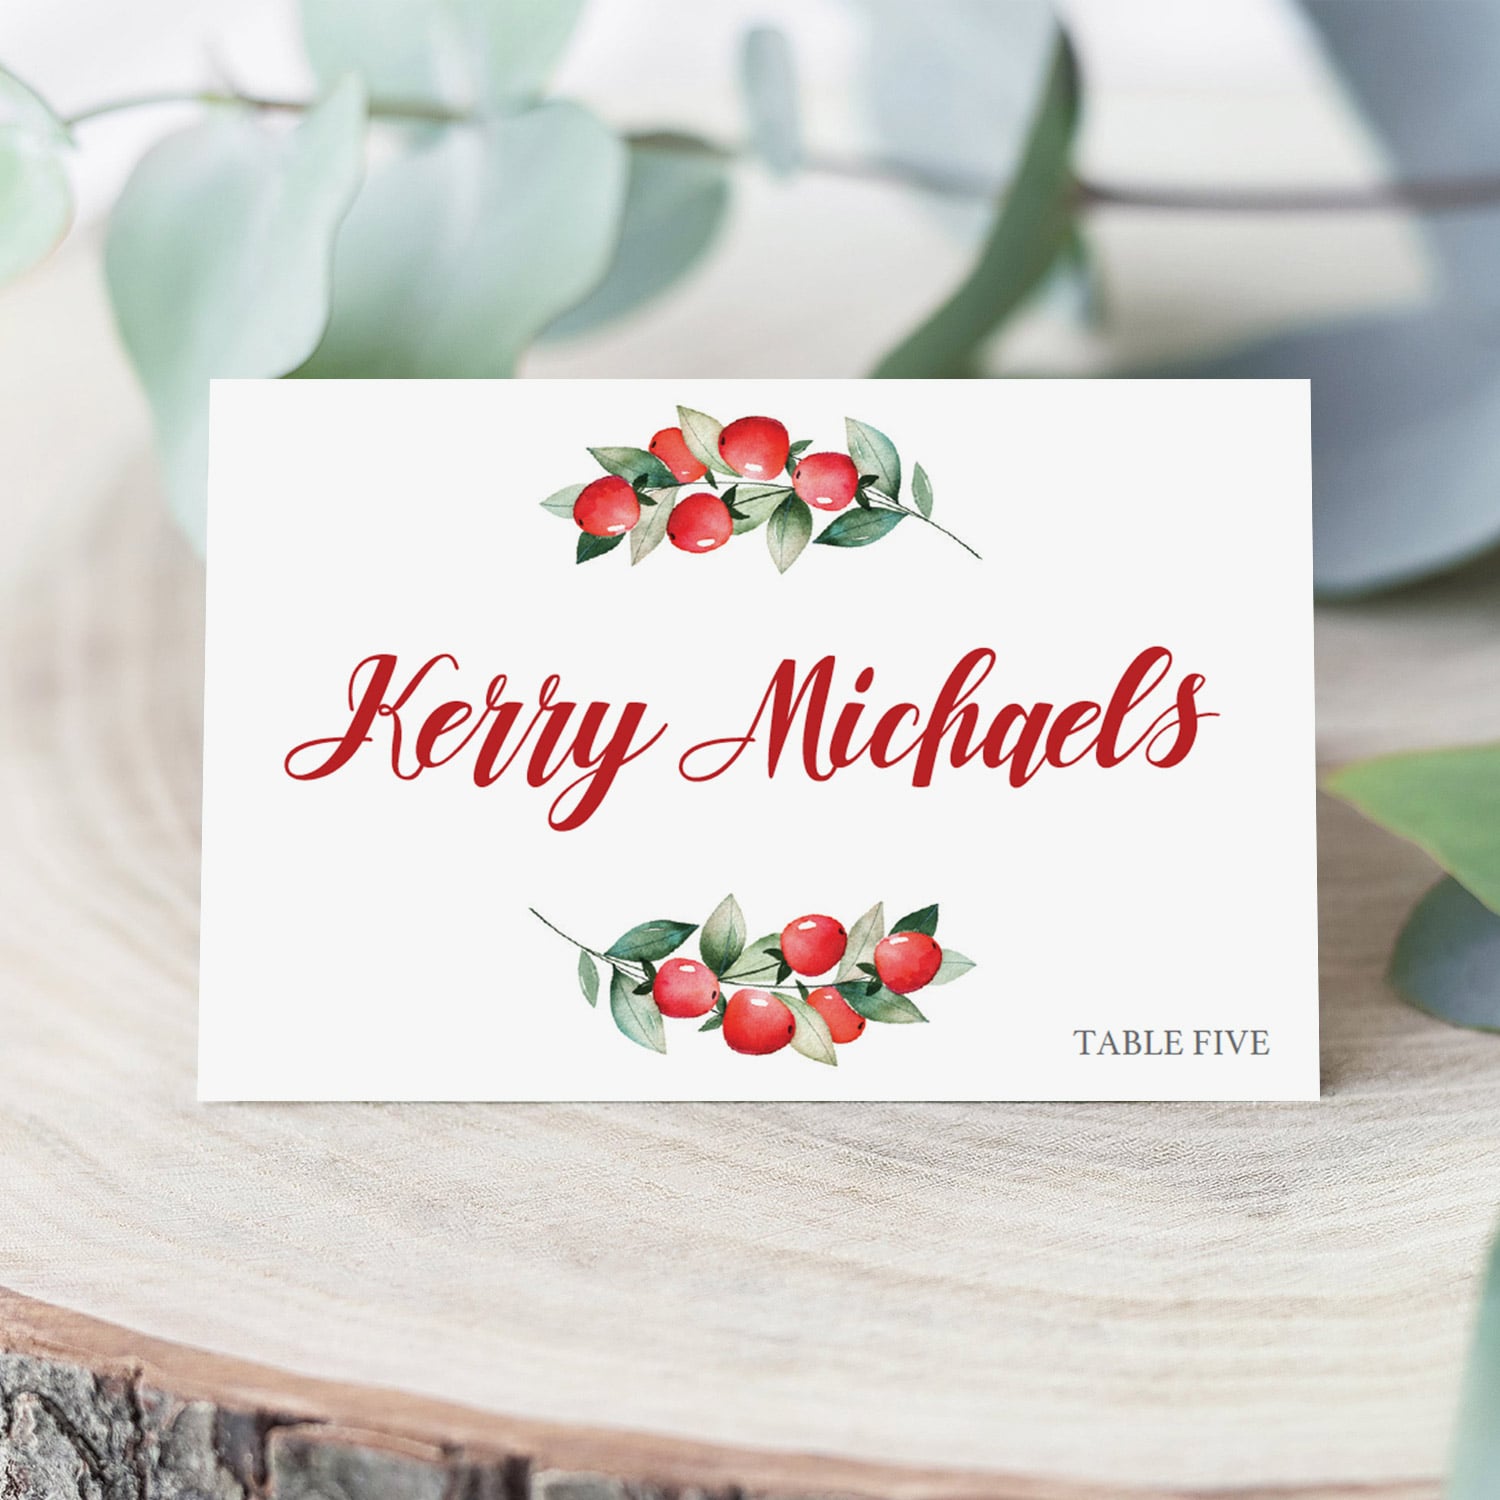 Christmas Dinner Party Place Cards Template by LittleSizzle